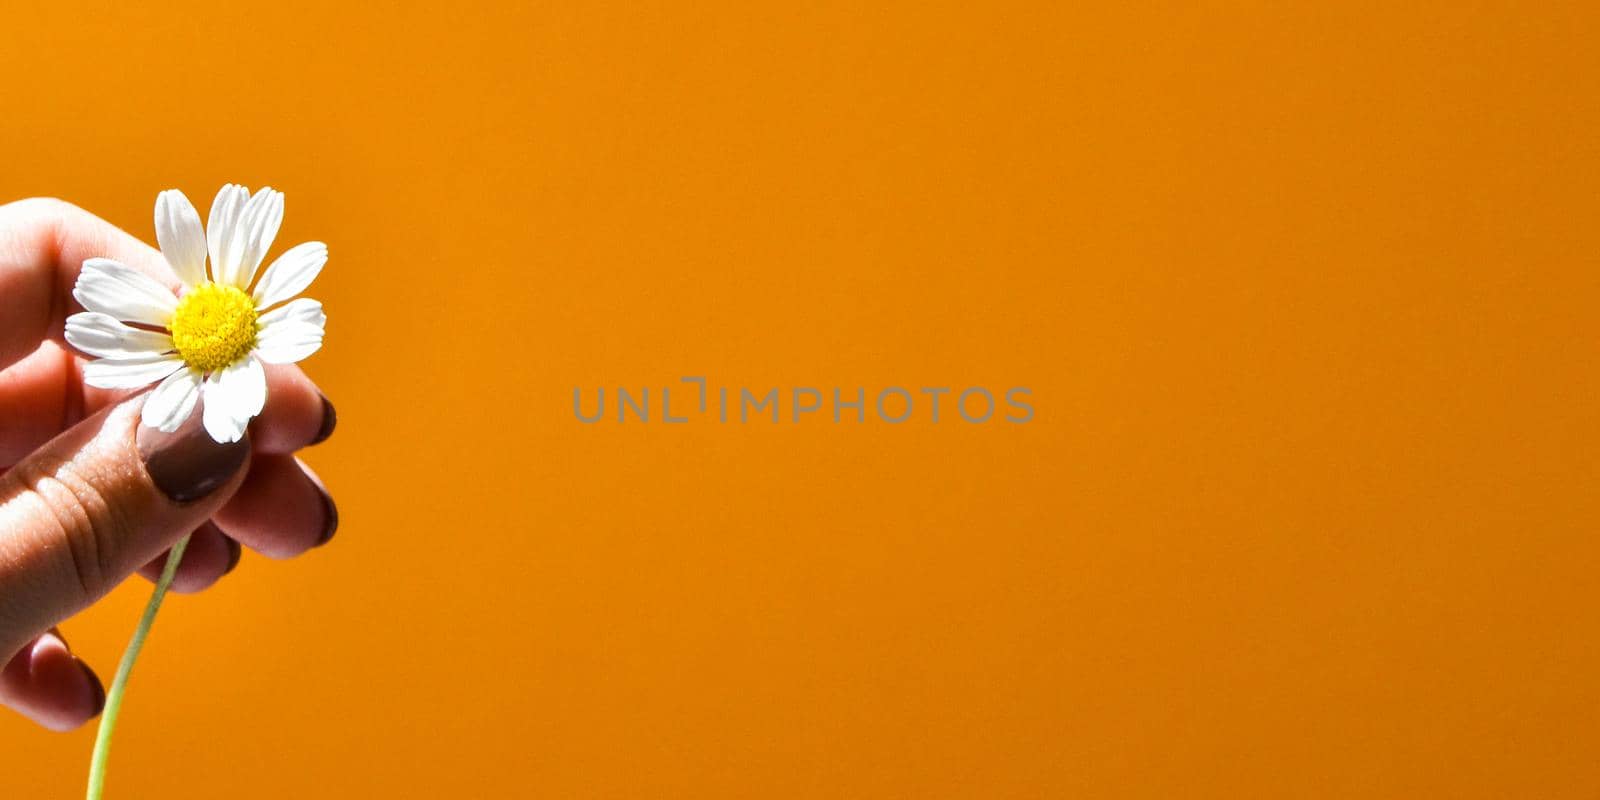 Very close up of little daisies flowers in hand on bright orange background, Selective focus, copy space for text